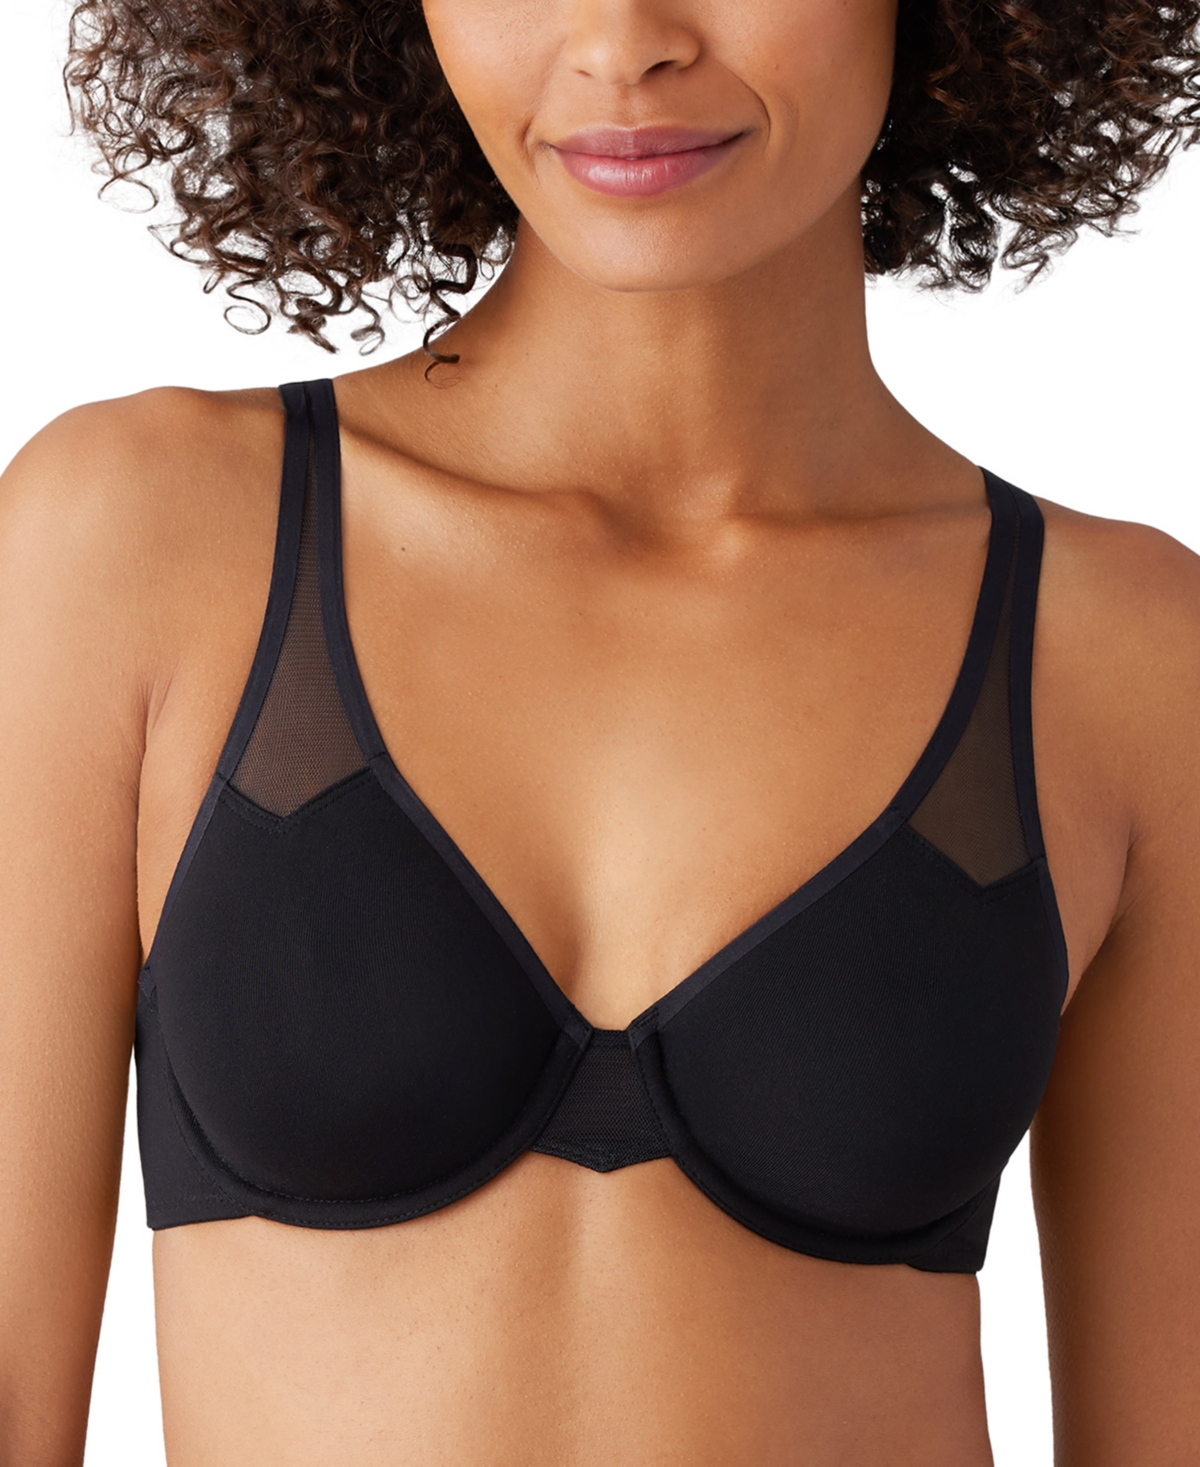 Women's Superbly Smooth Underwire Bra 855342, Up to H Cup